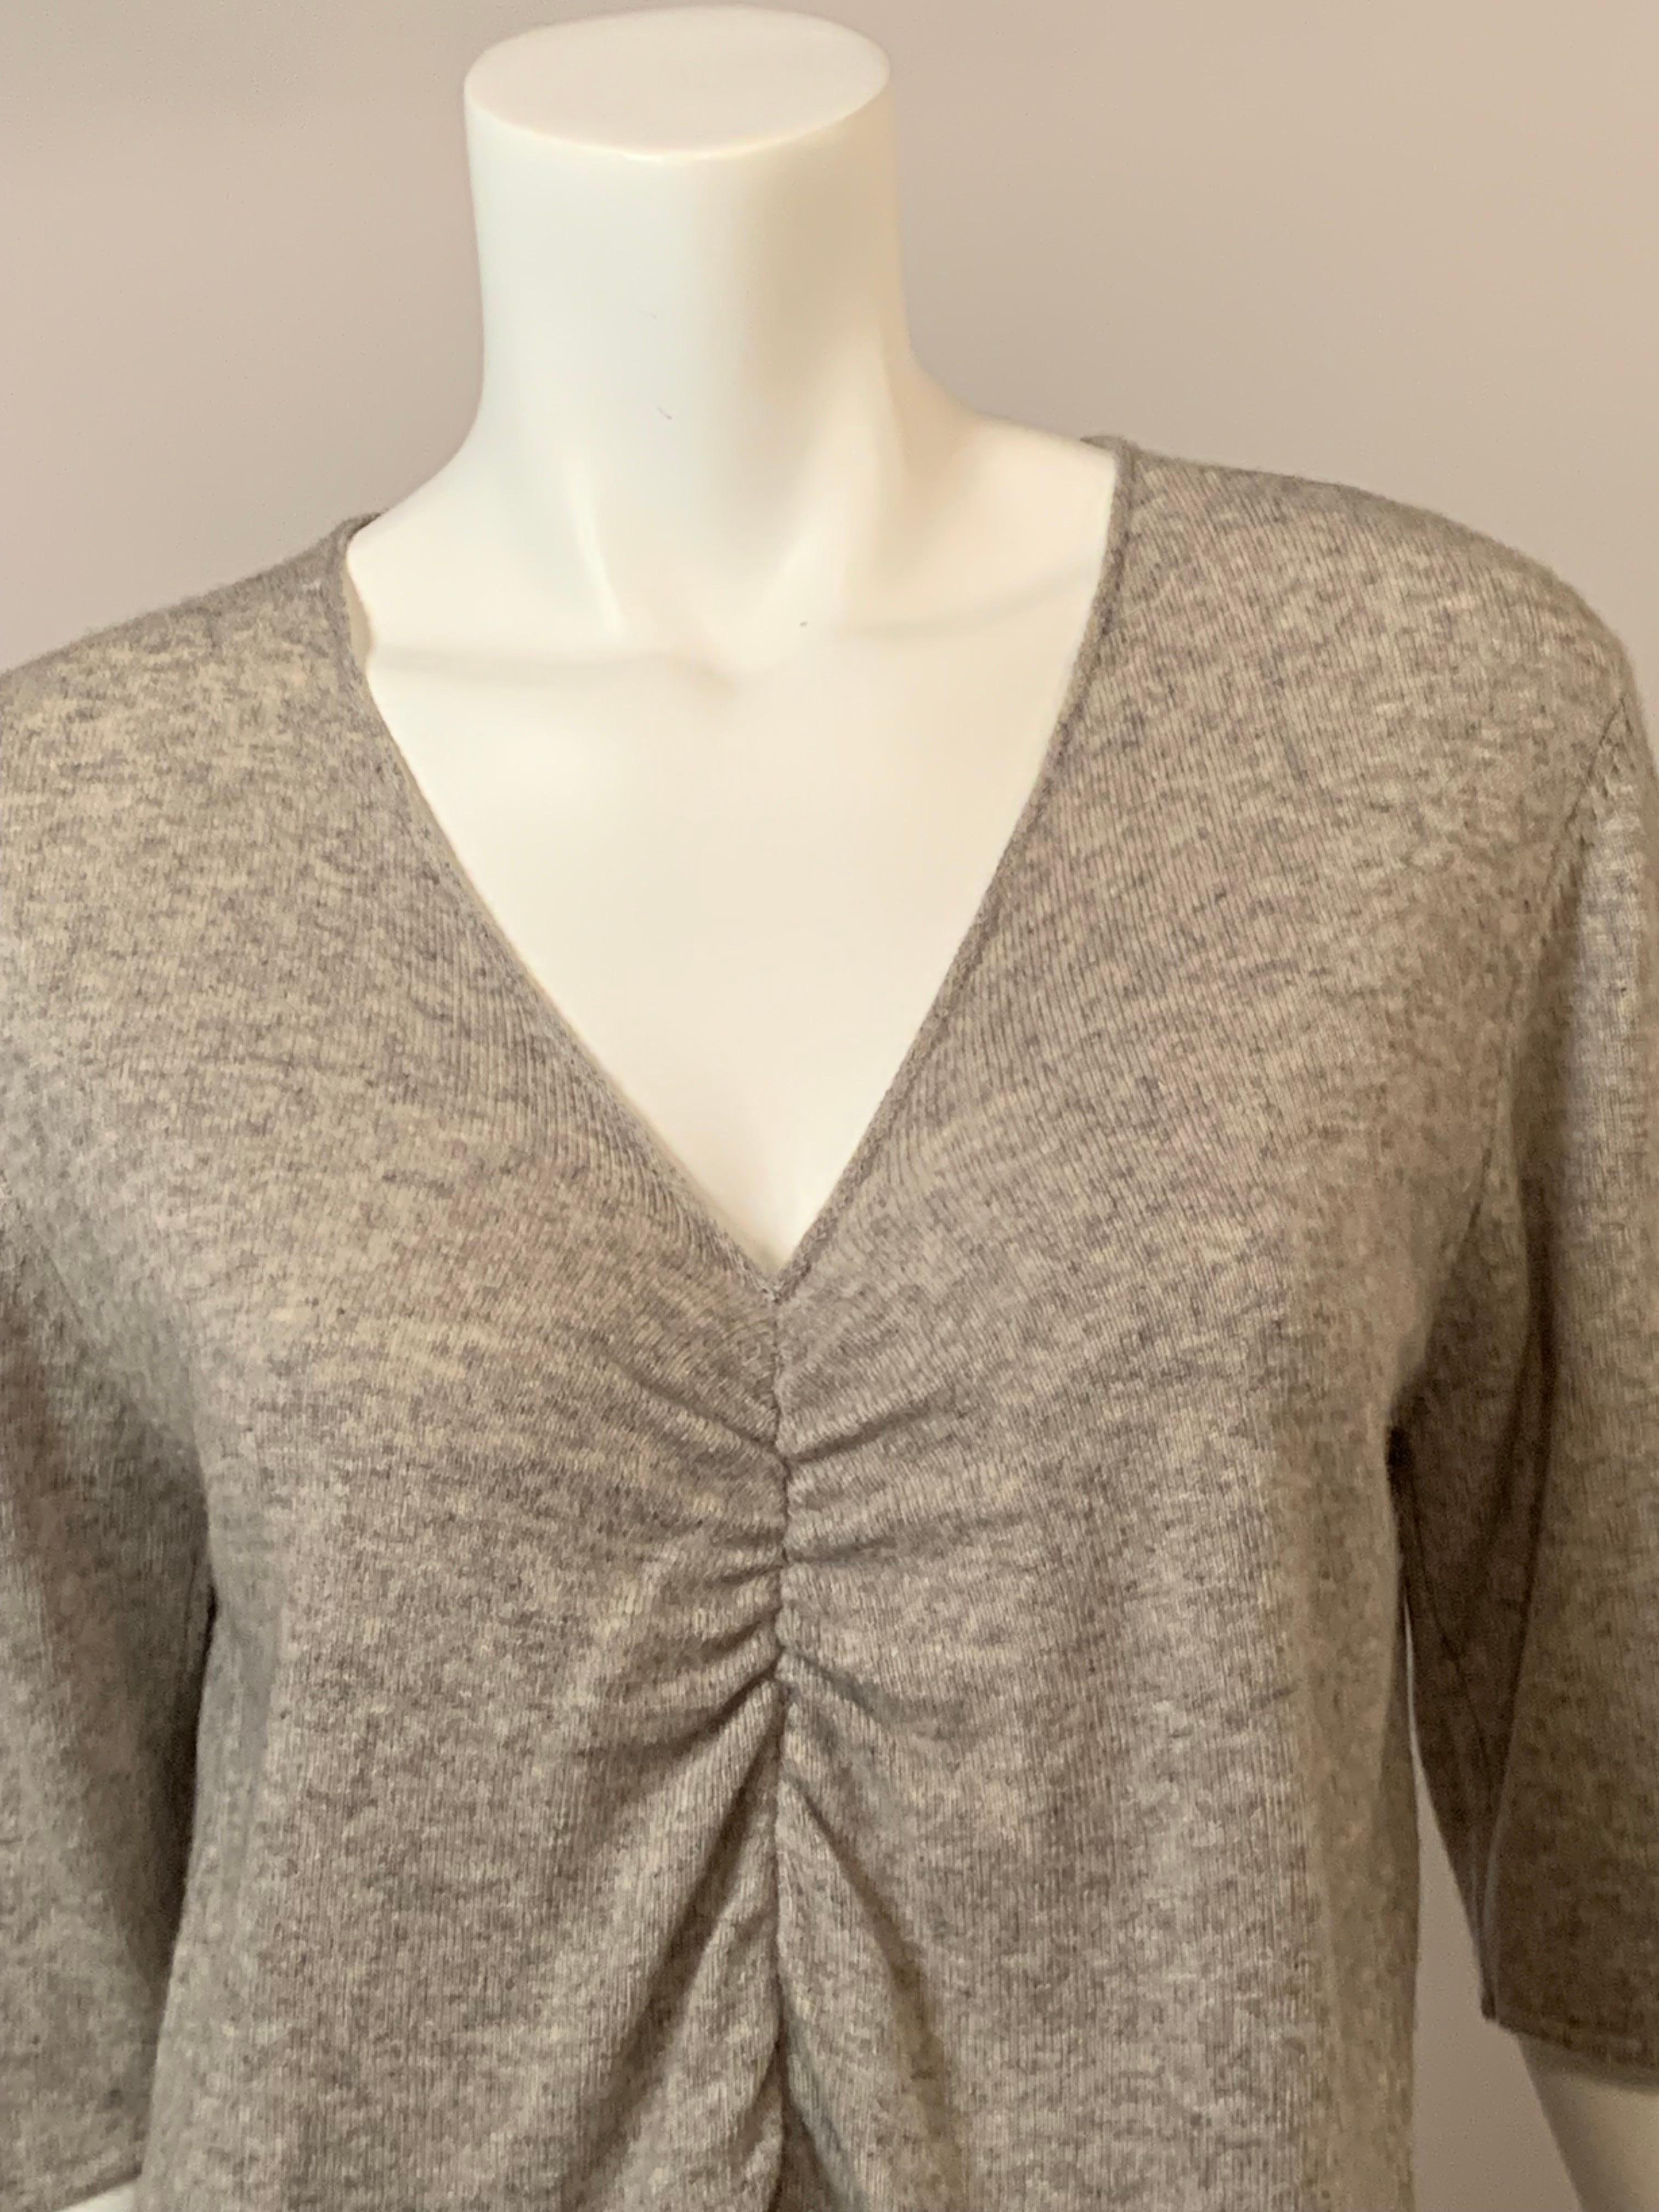 Giorgio Armani Heather Grey Cashmere Sweater  Never Worn In New Condition For Sale In New Hope, PA